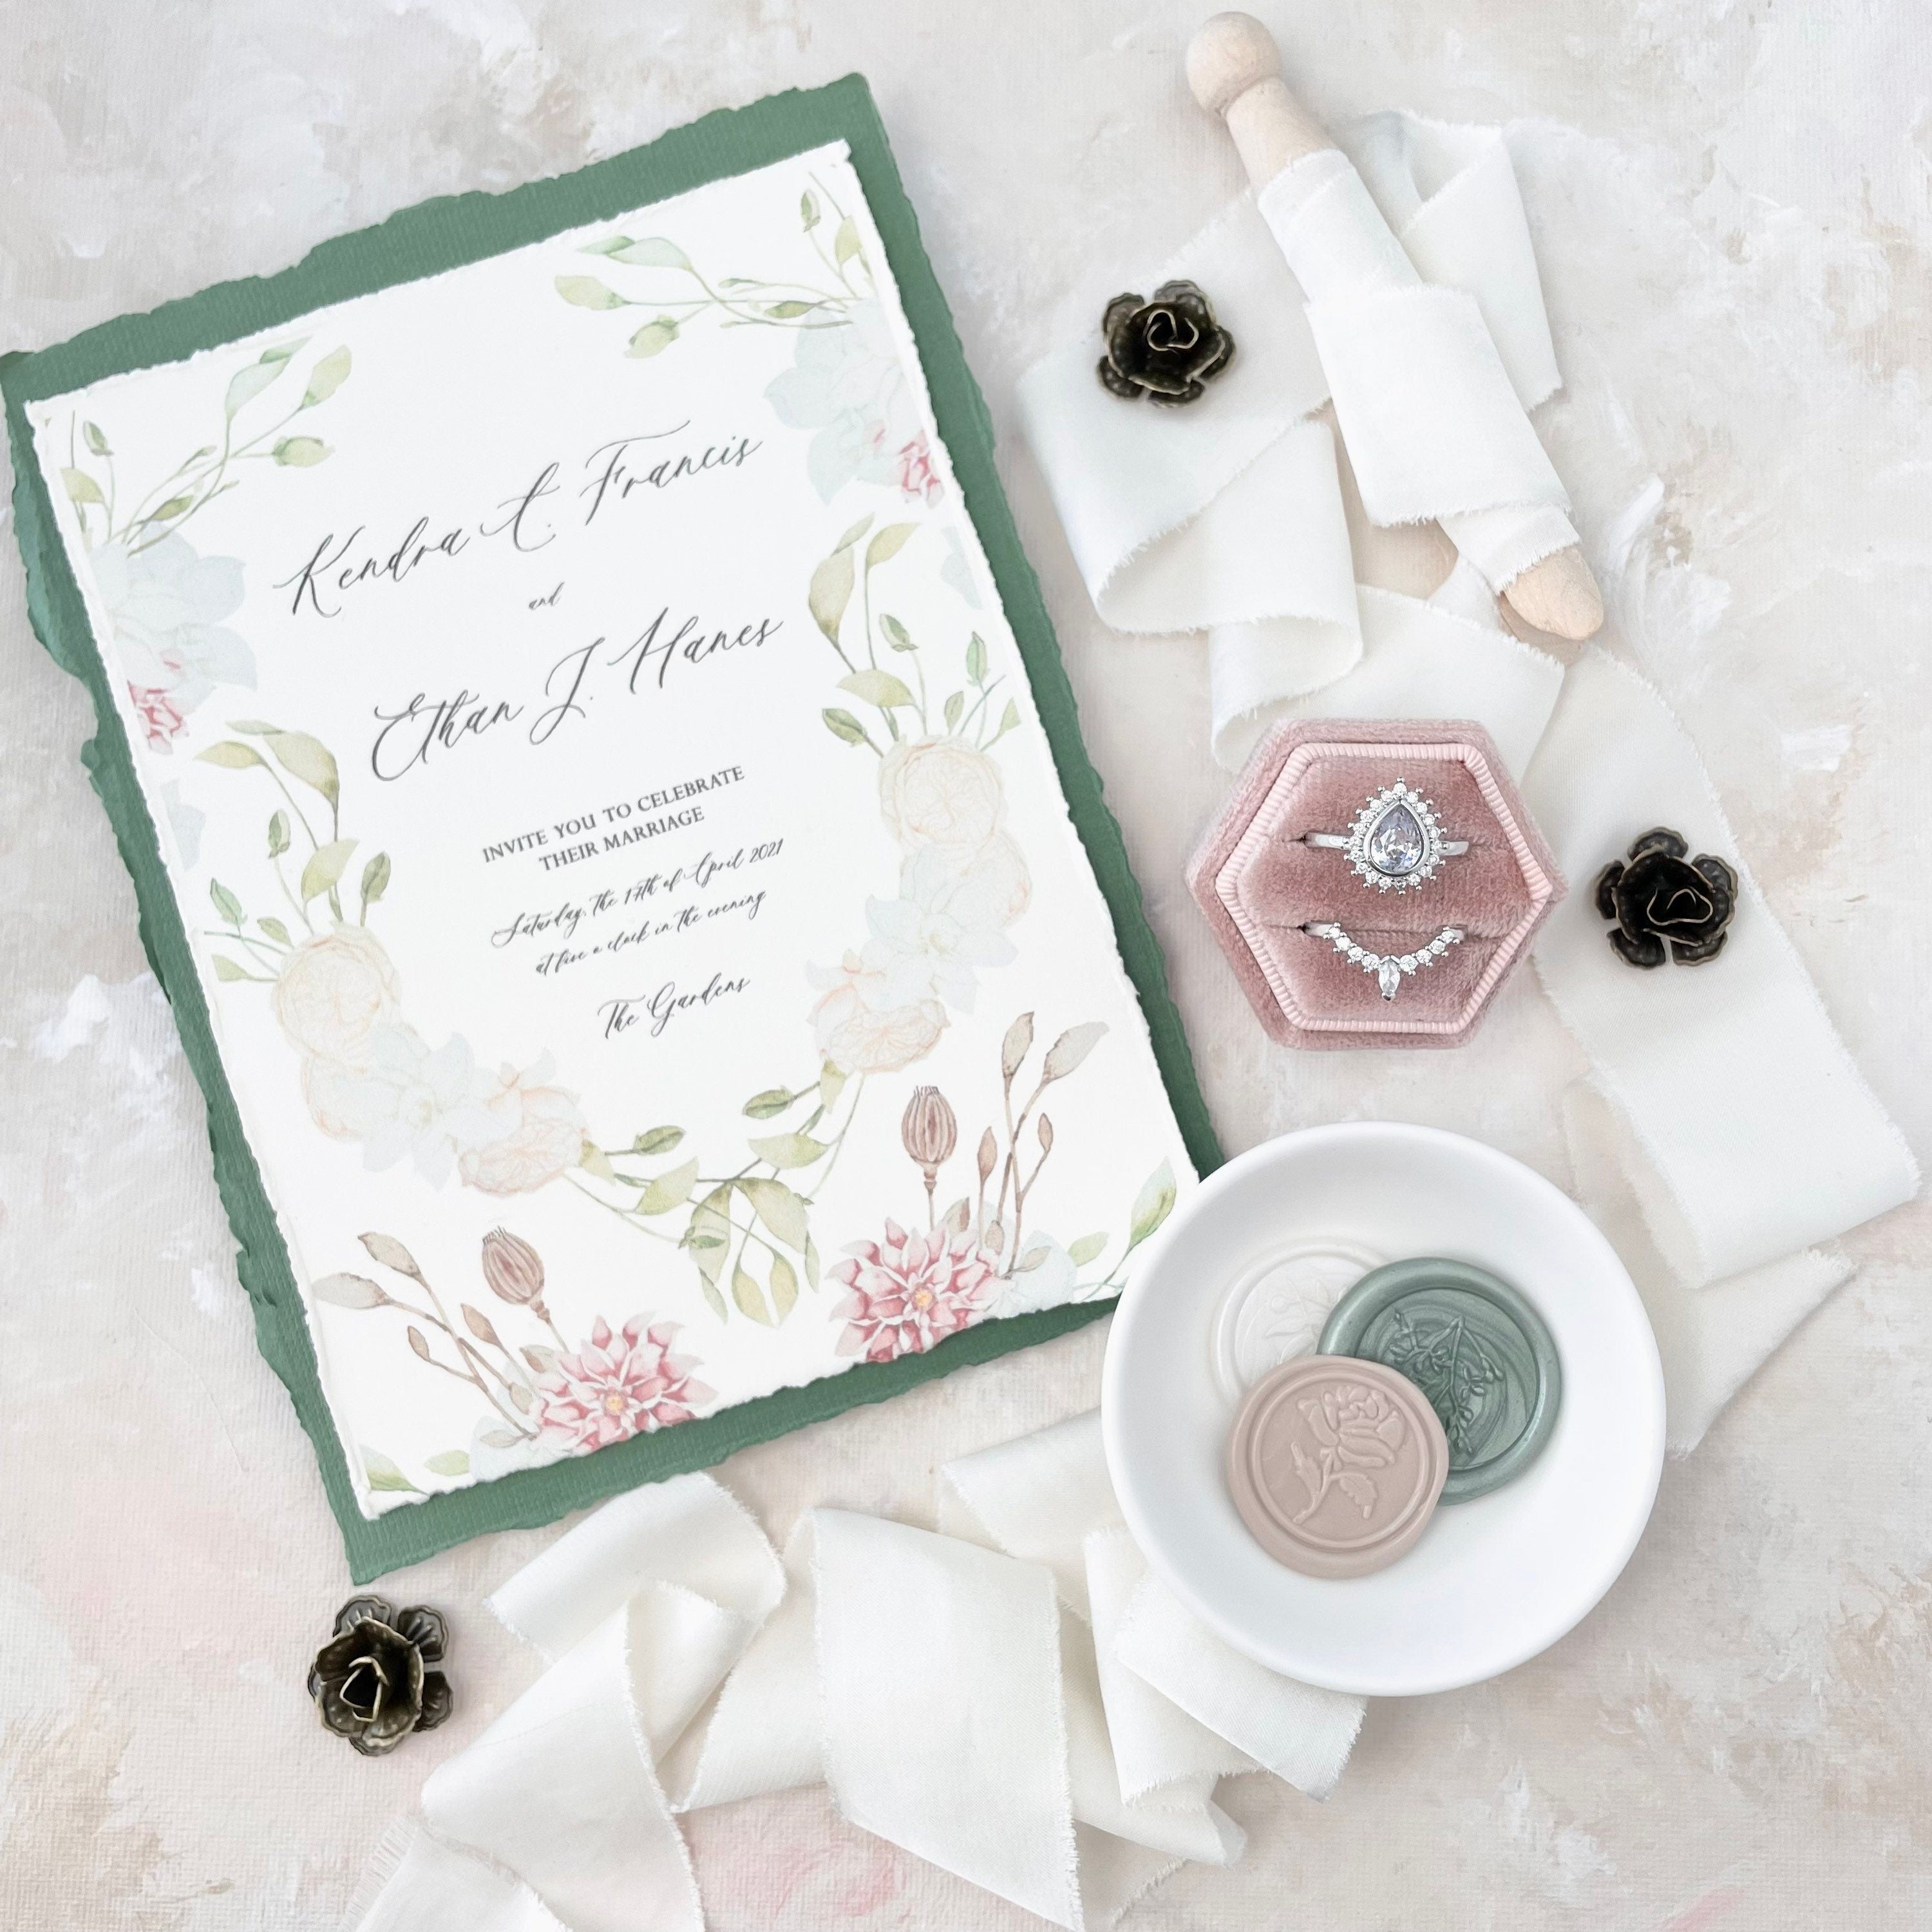 Ivory silk satin ribbon on wood pin styled with green and floral wedding invitation, dusty pink velvet ring box, and 3 neutral colored wax seals in white tray - flat lay props from Champagne & GRIT